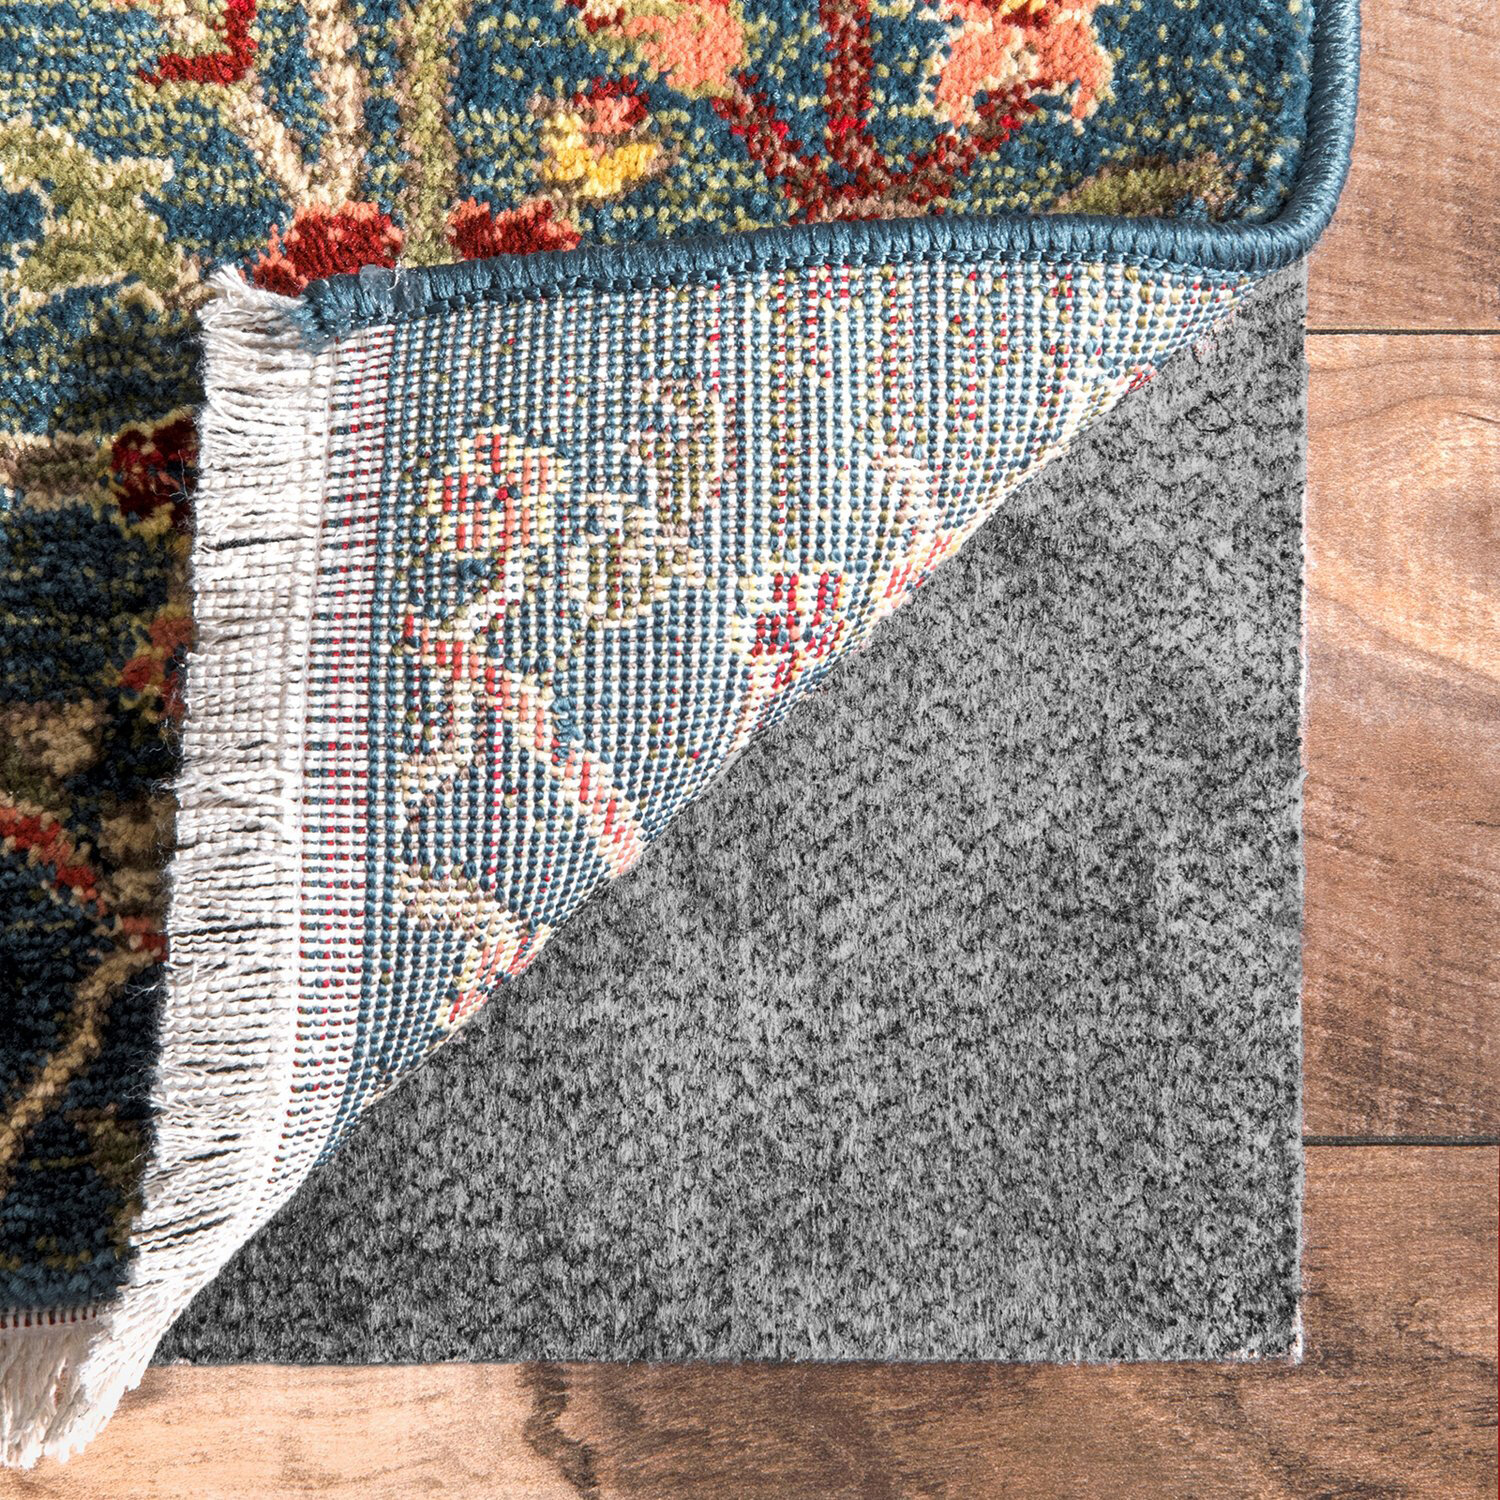 2x3 Non-Slip Area Rug Pad for Any Hard Surface Floors Keep Your Rugs Safe  and in Place